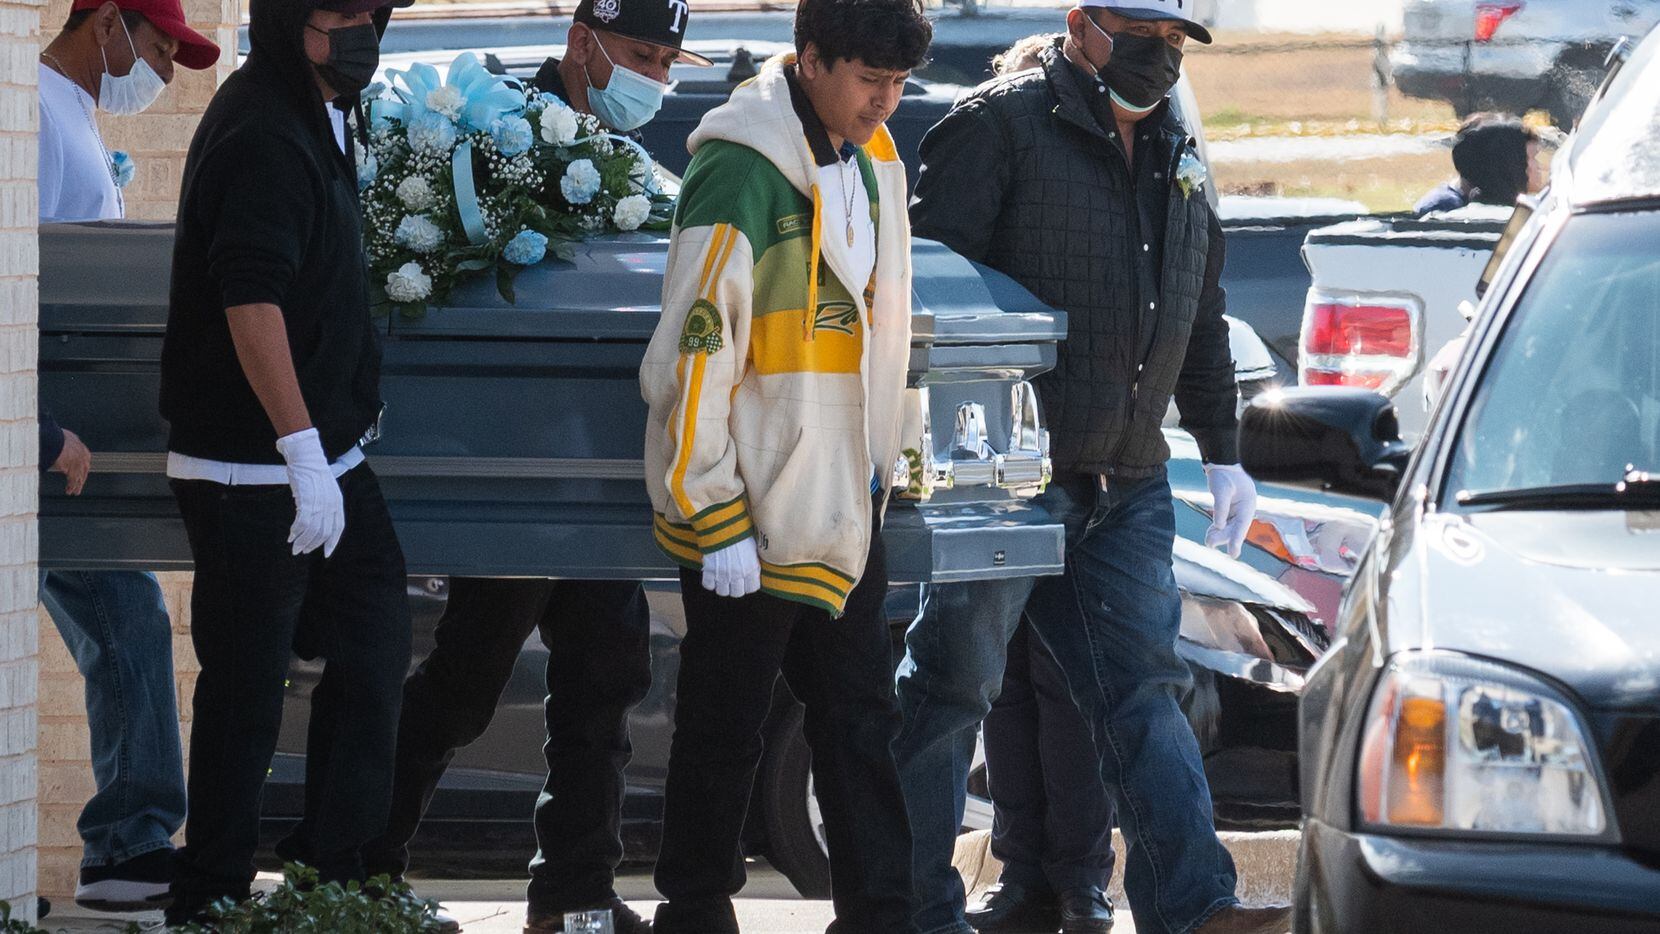 Pallbearers carried the casket of 16-year-old Ivan Noyola, 16, after his memorial service in...